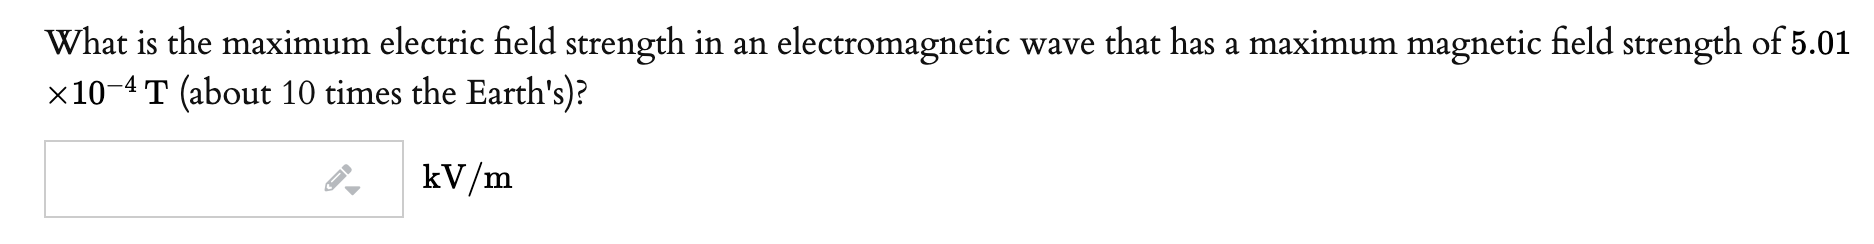 What is the maximum electric field strength in an electromagnetic wave that has a maximum magnetic field strength of 5.01
x10-4 T (about 10 times the Earth's)?
